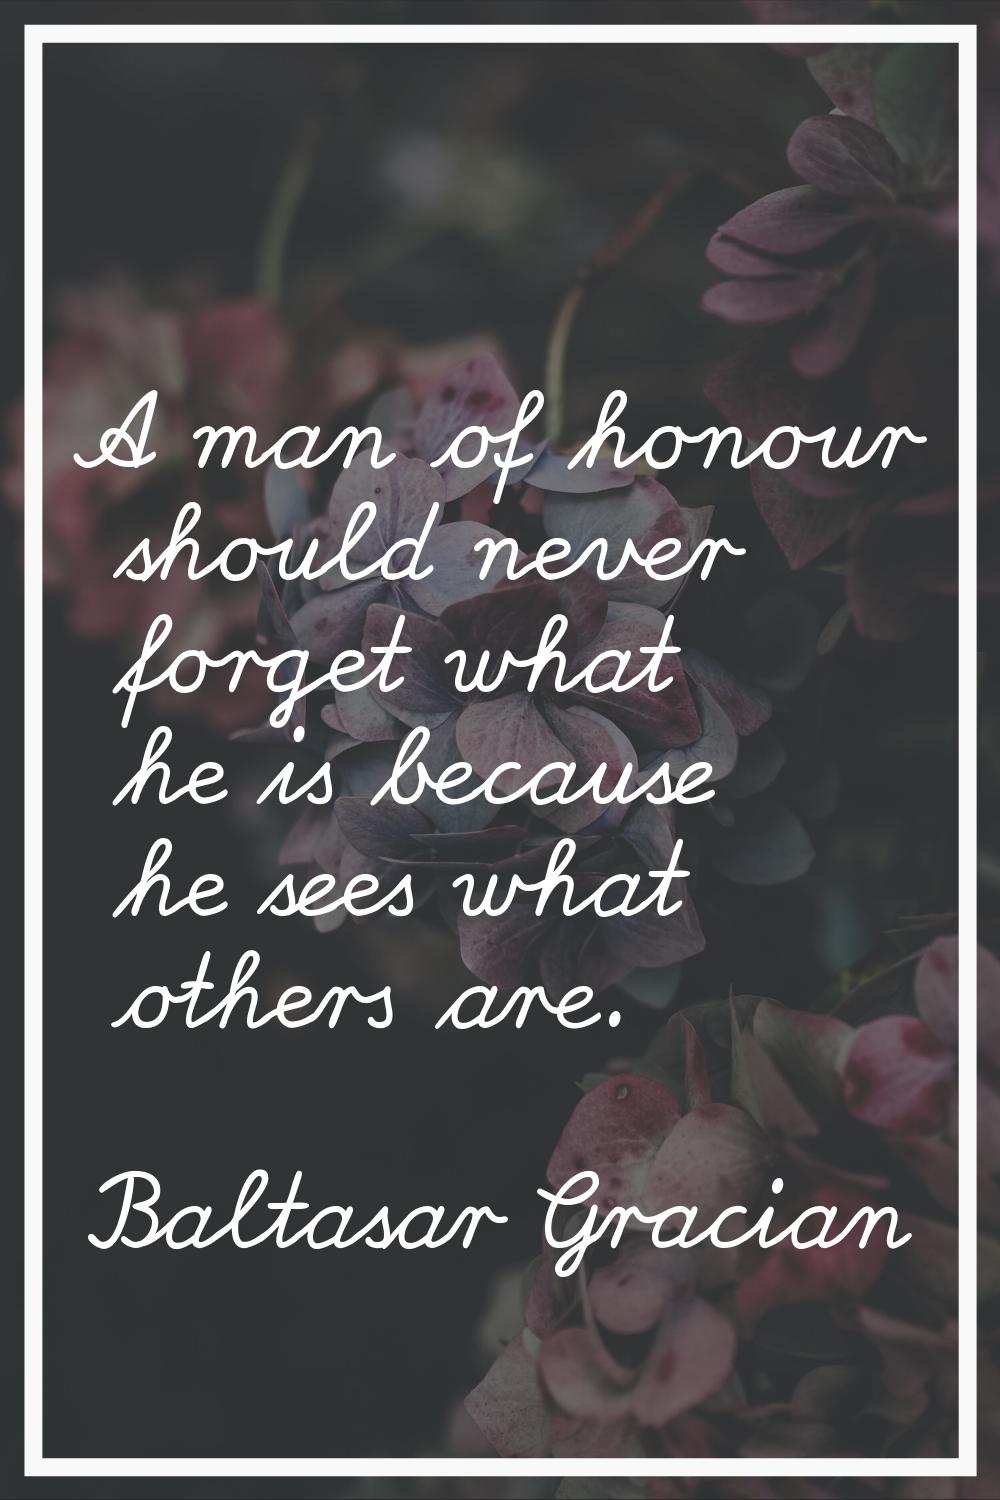 A man of honour should never forget what he is because he sees what others are.